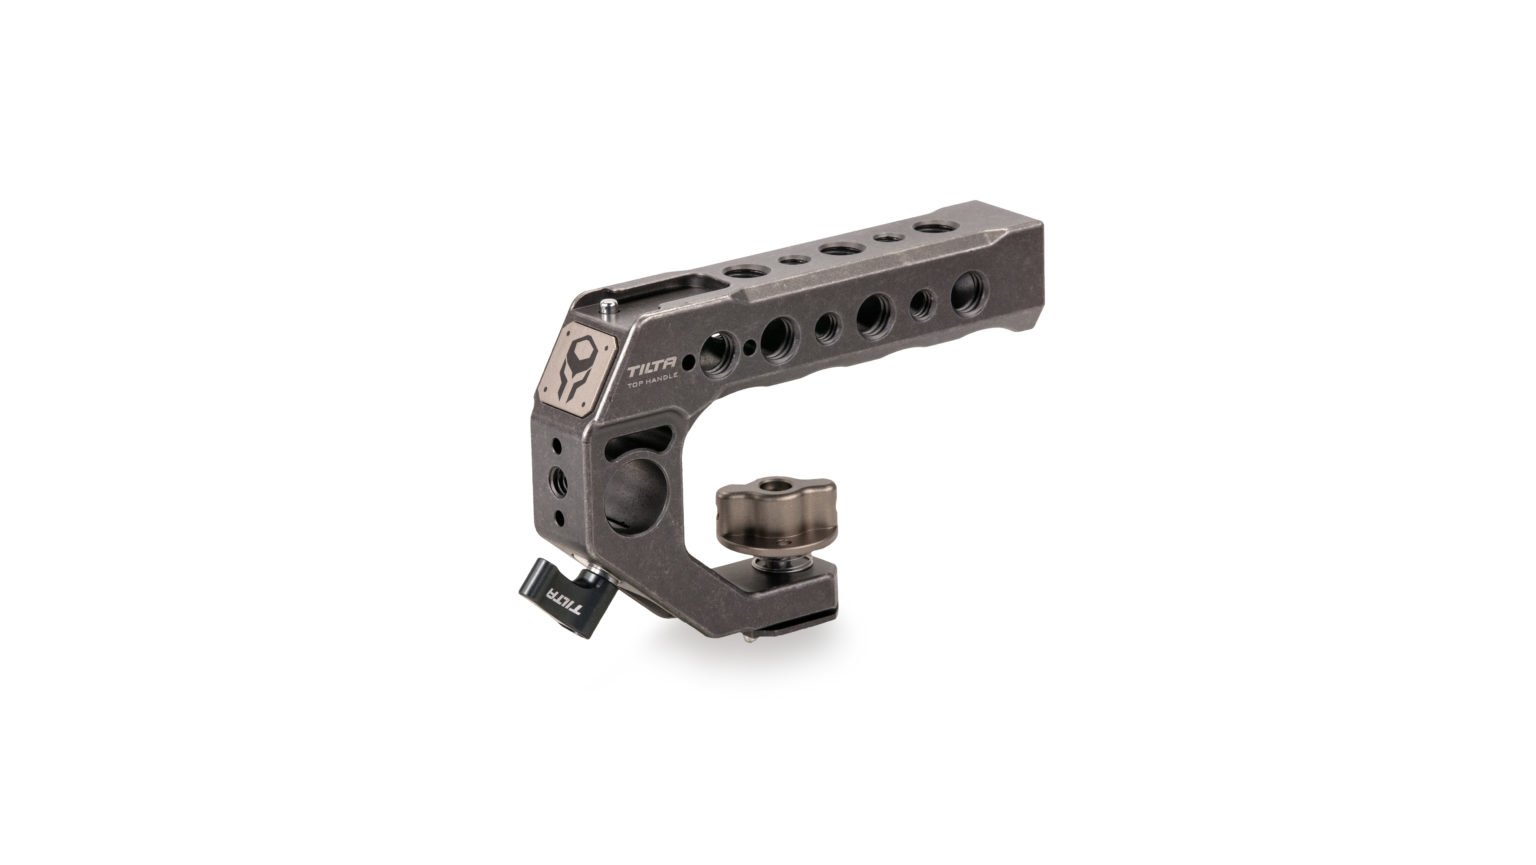 Tiltaing Lightweight Quick Release Top Handle with Arri Locating Pins